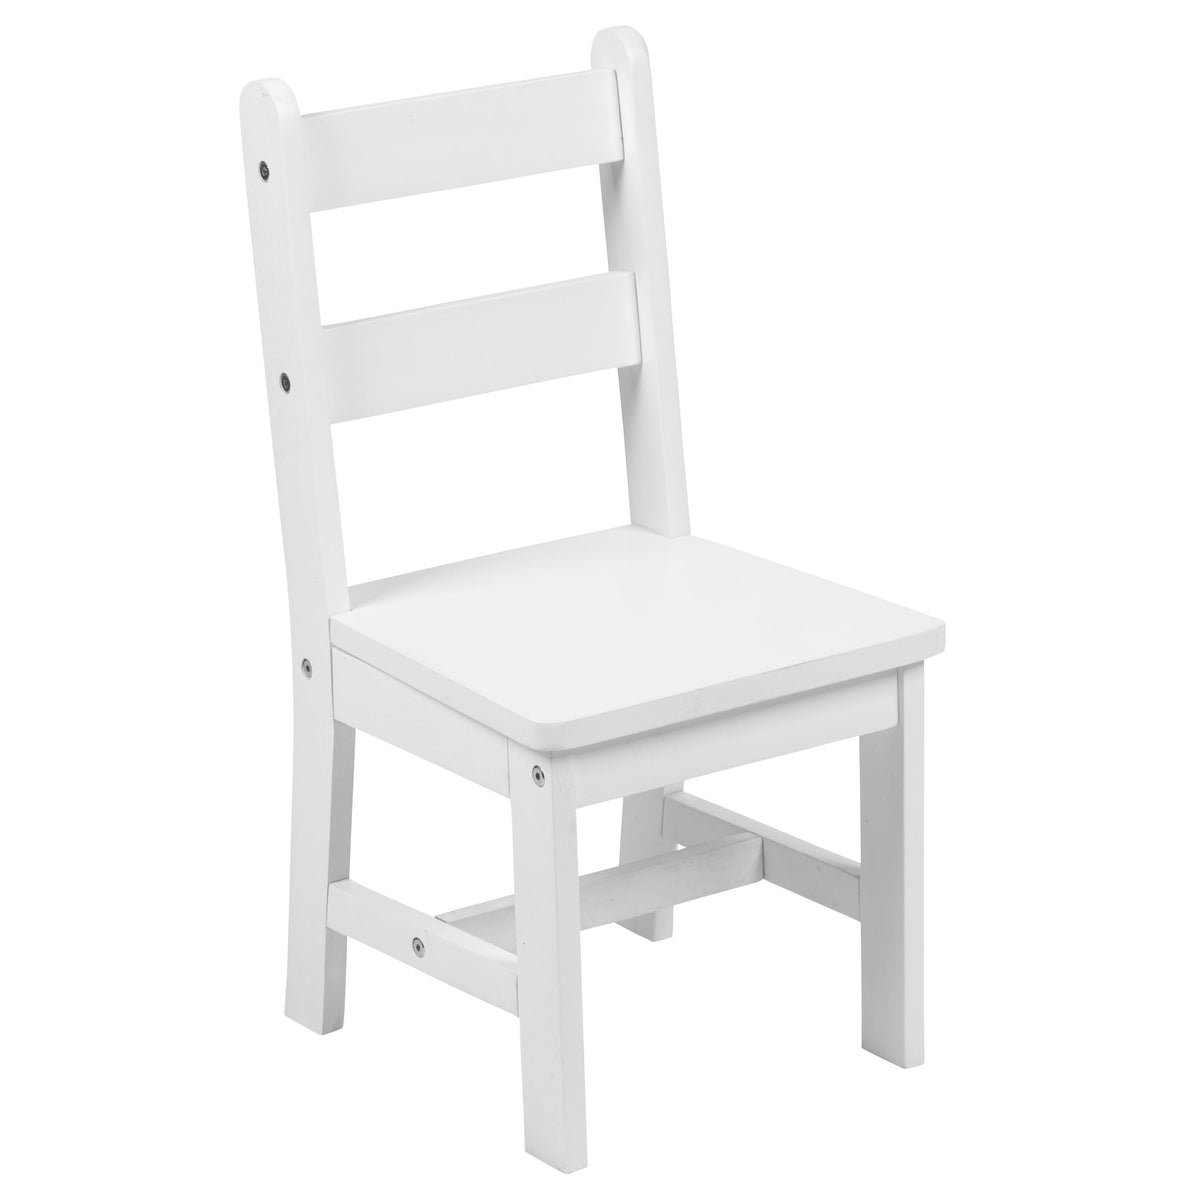 White |#| Kids 3 Piece Solid Hardwood Table and Chair Set for Playroom, Kitchen - White